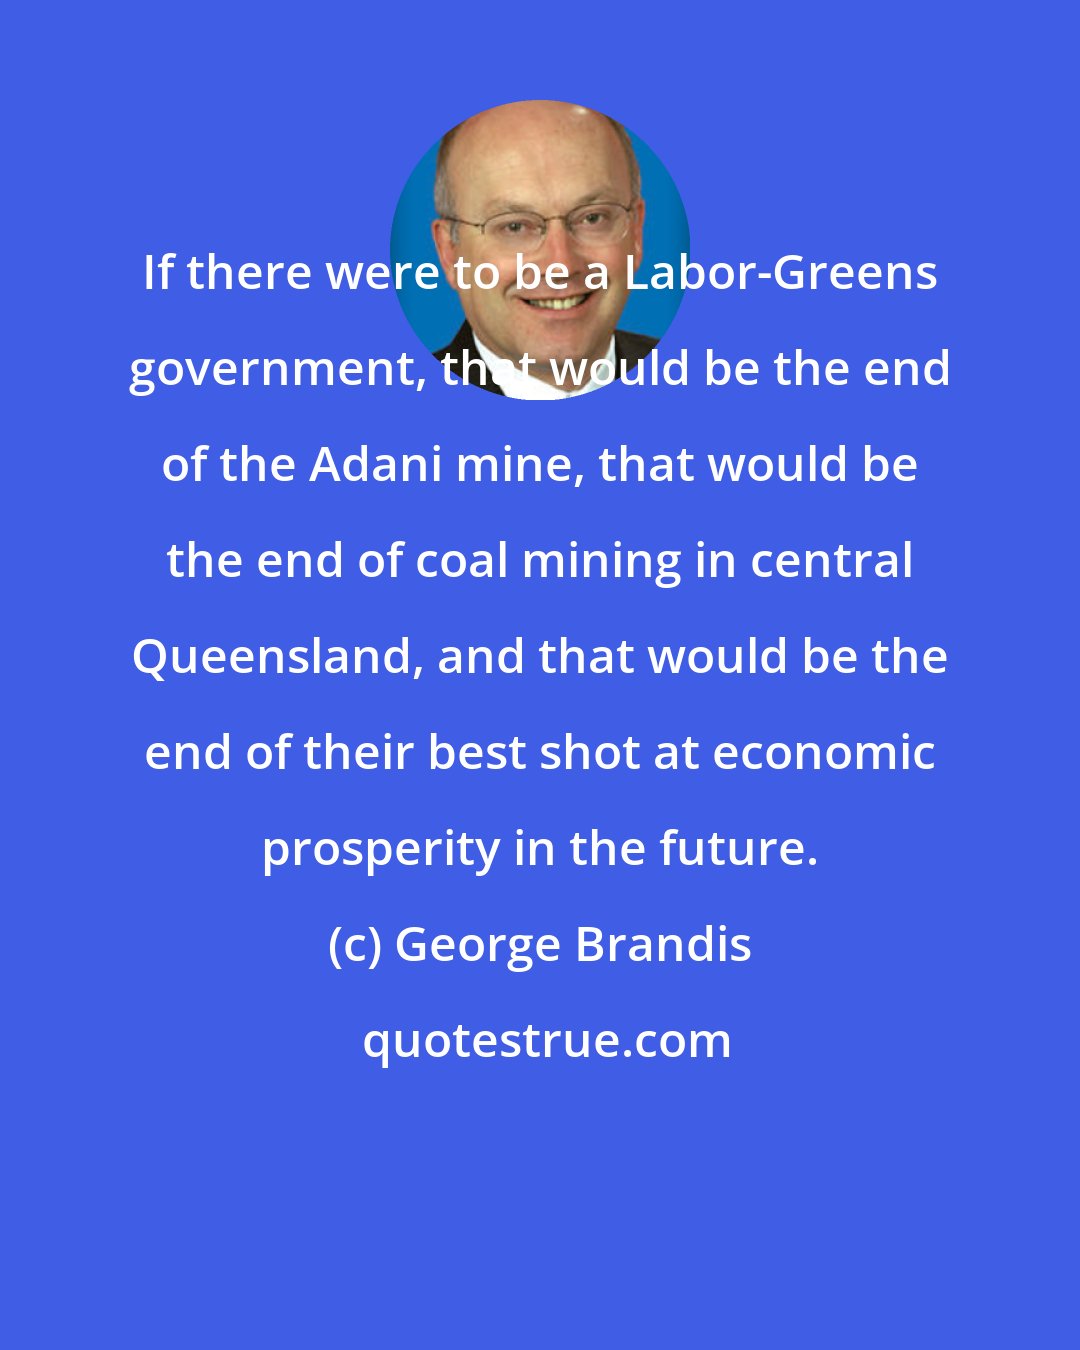 George Brandis: If there were to be a Labor-Greens government, that would be the end of the Adani mine, that would be the end of coal mining in central Queensland, and that would be the end of their best shot at economic prosperity in the future.